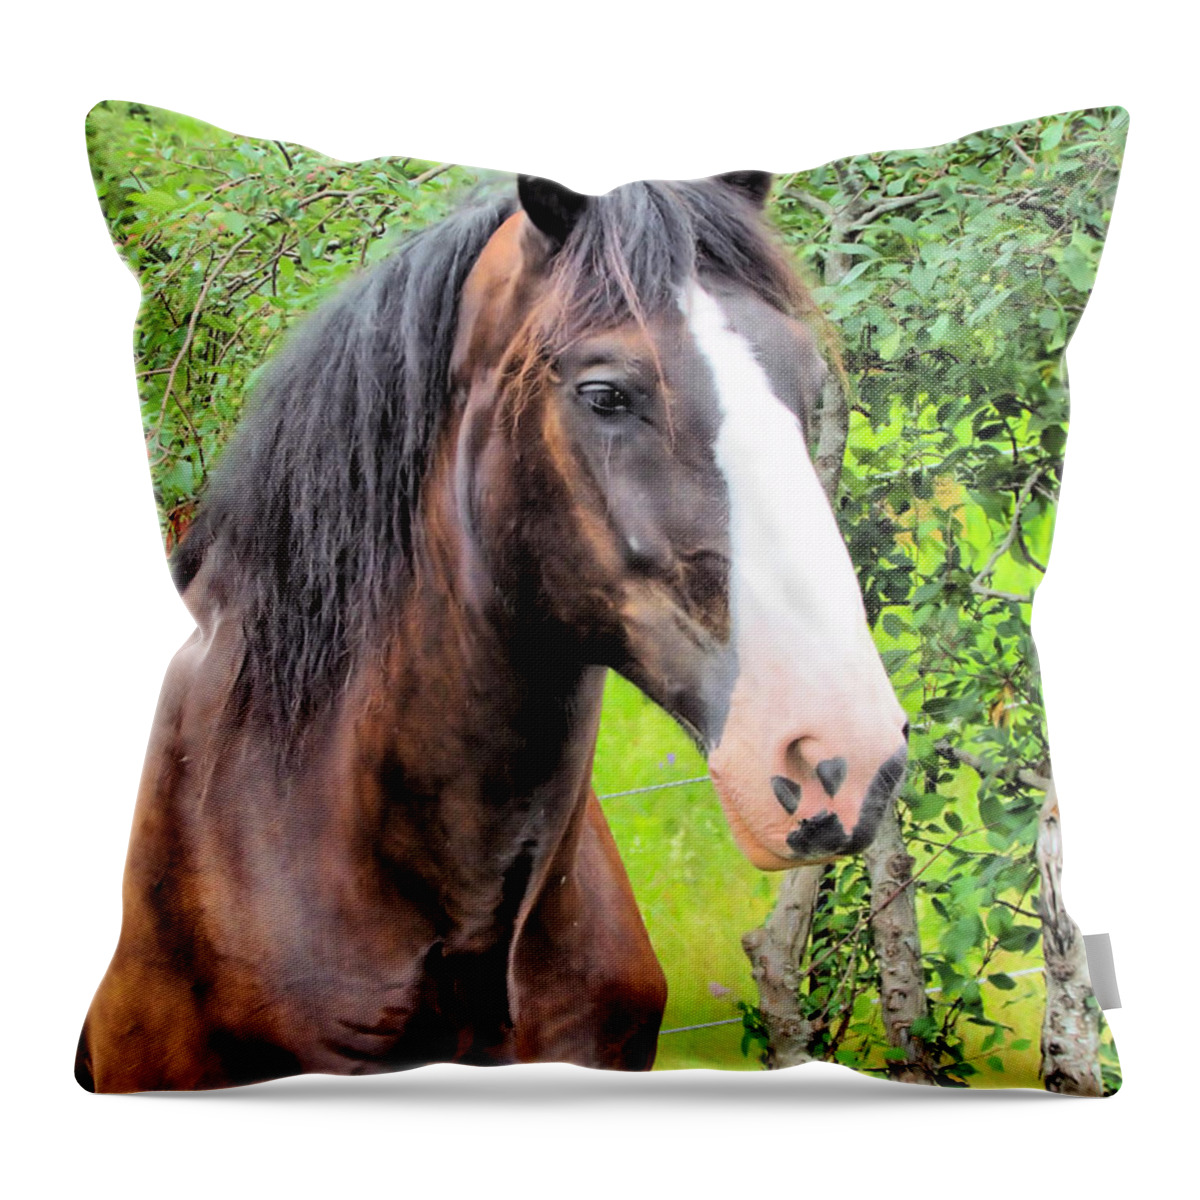 Shire Horse Throw Pillow featuring the photograph Gentle Soul by Elizabeth Dow